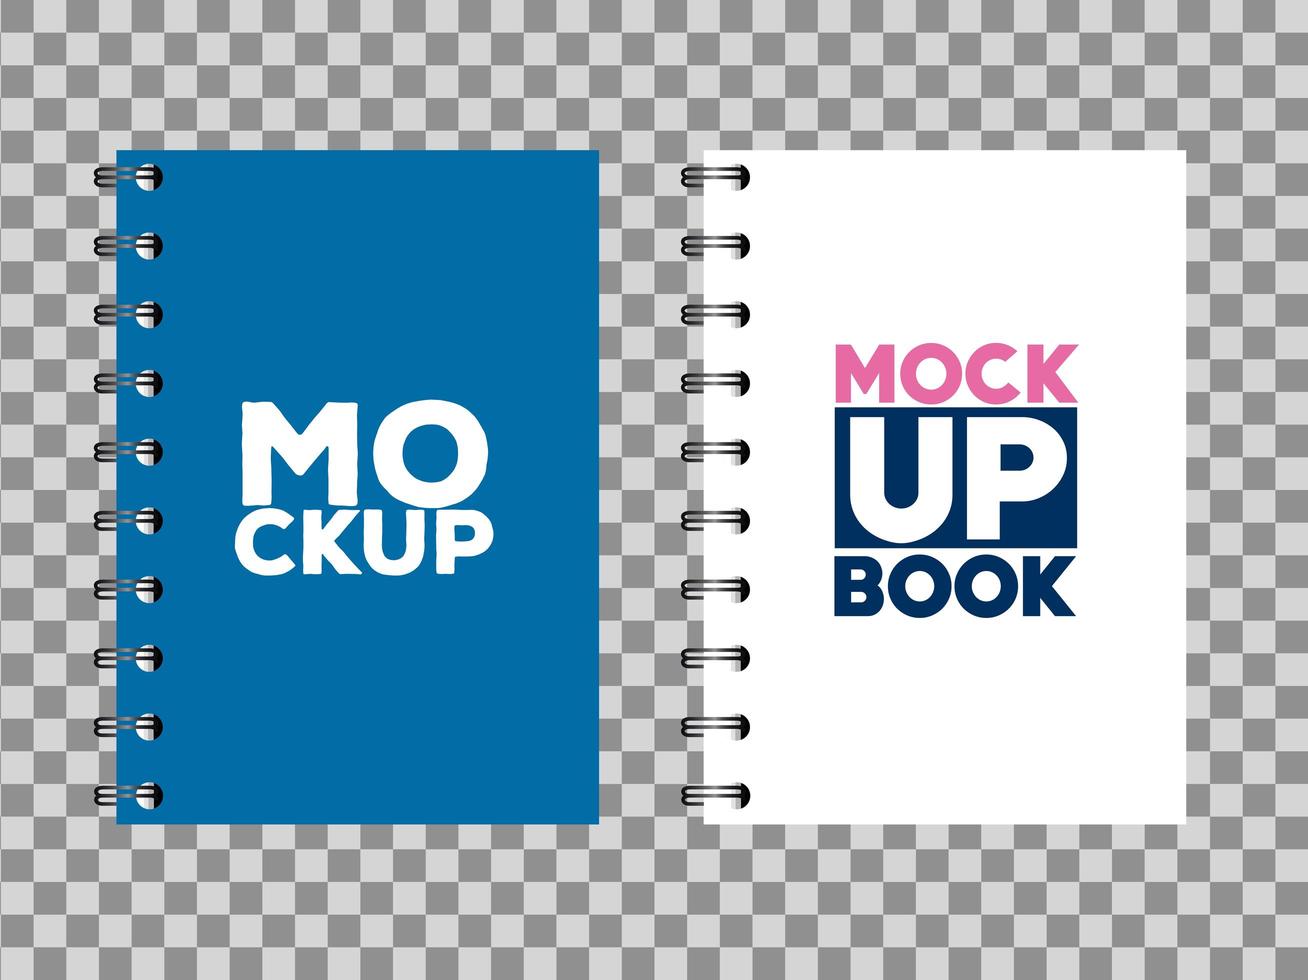 corporate identity branding mockup, mockup with notebooks of cover blue and white color vector